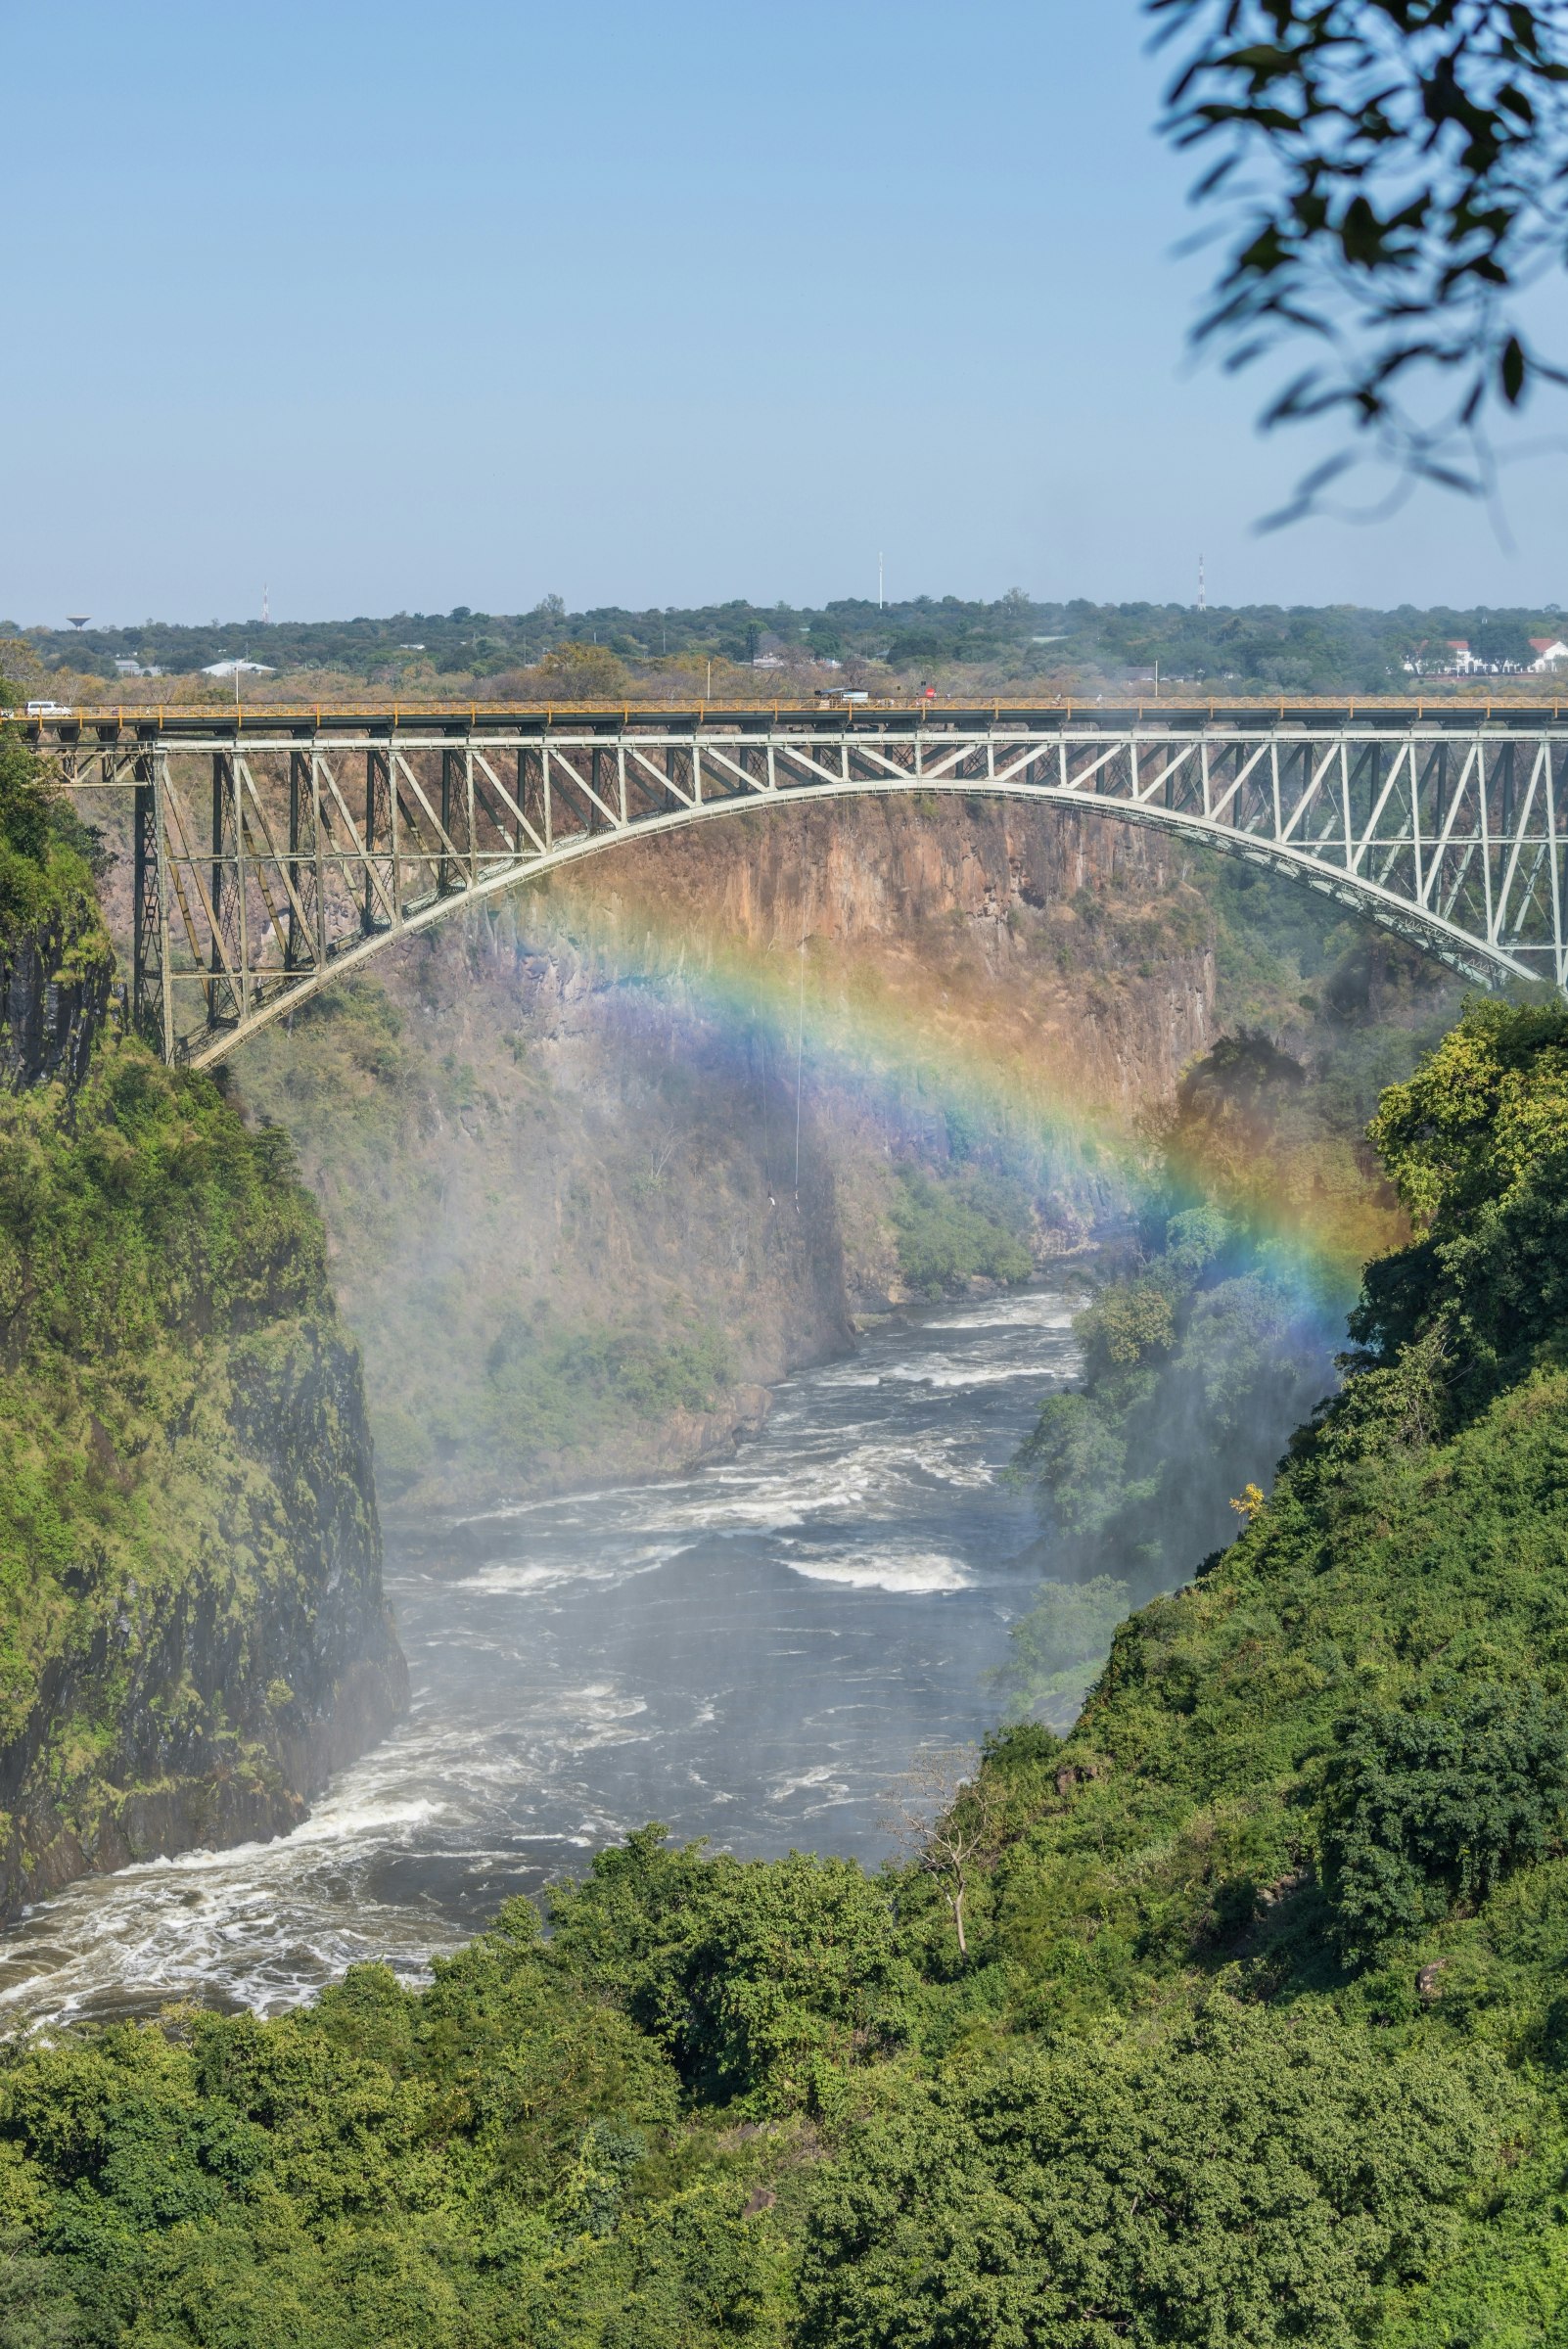 Beyond a foreground of lush bush are the rapids of the Zambezi river and mist from Victoria Falls; behind the rainbow is the graceful arch of Victoria Falls Bridge.